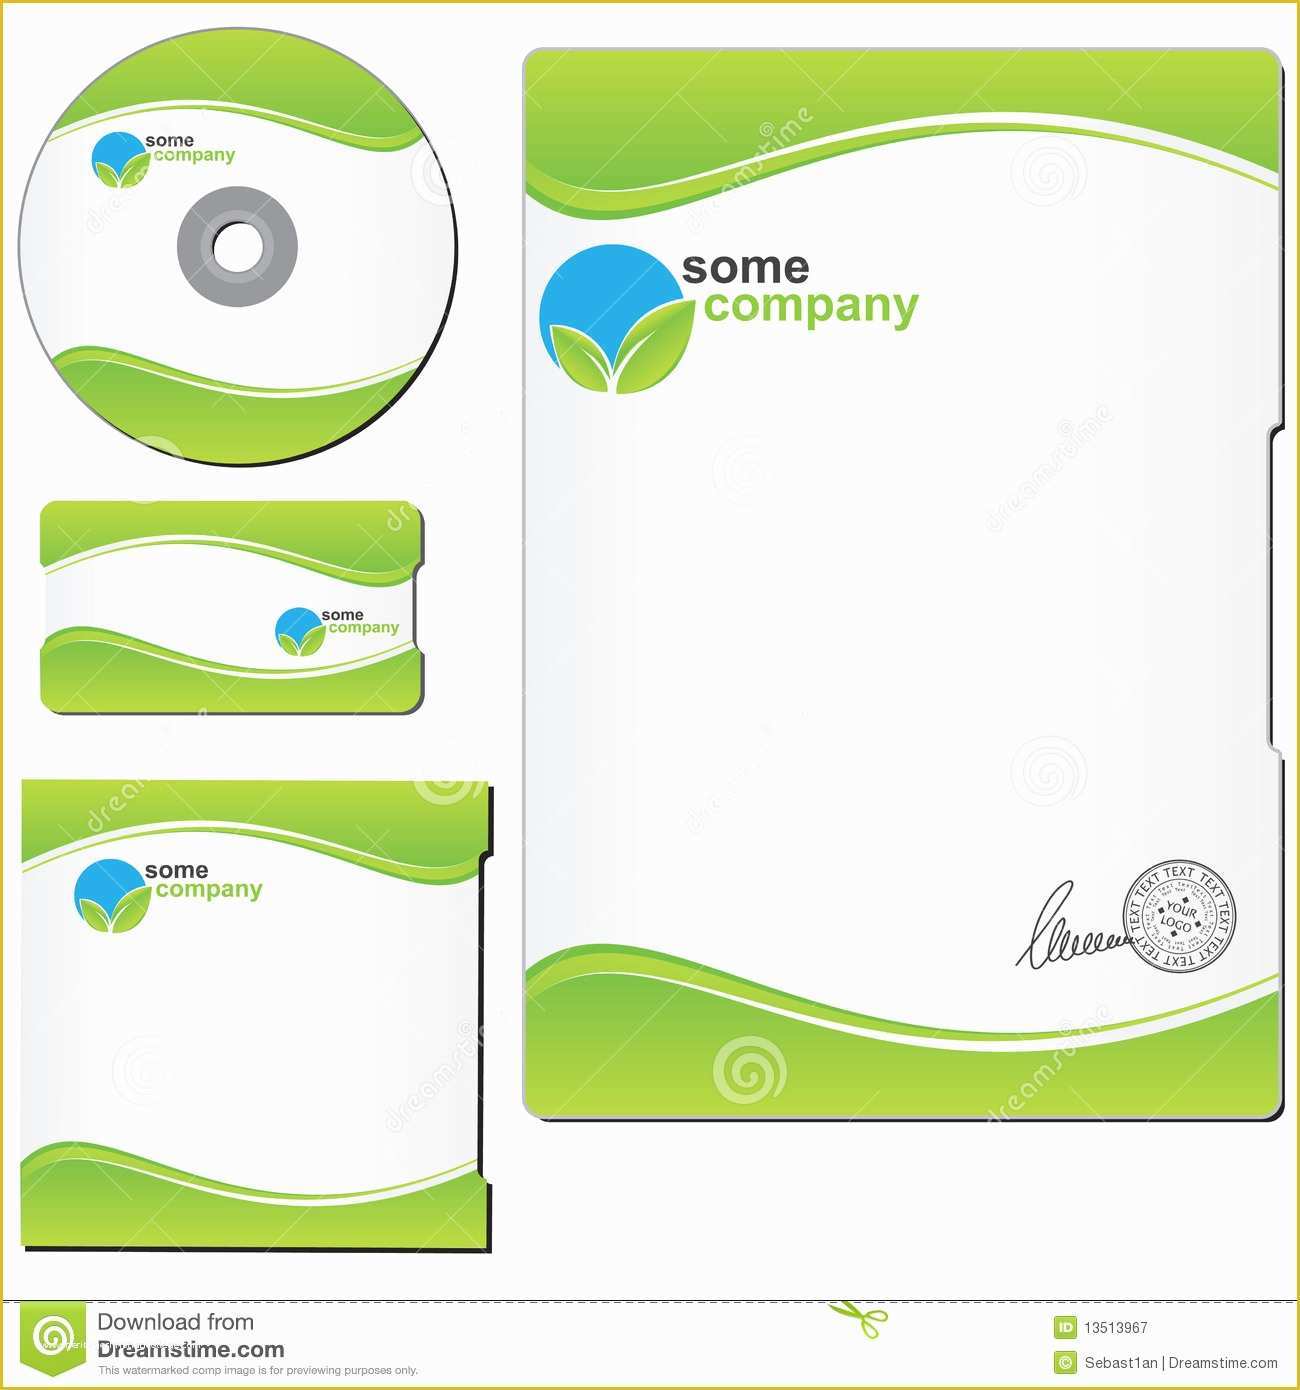 Free Flyer Brochure Templates Of Groups Visual Basic for Applications 7862a53c666d